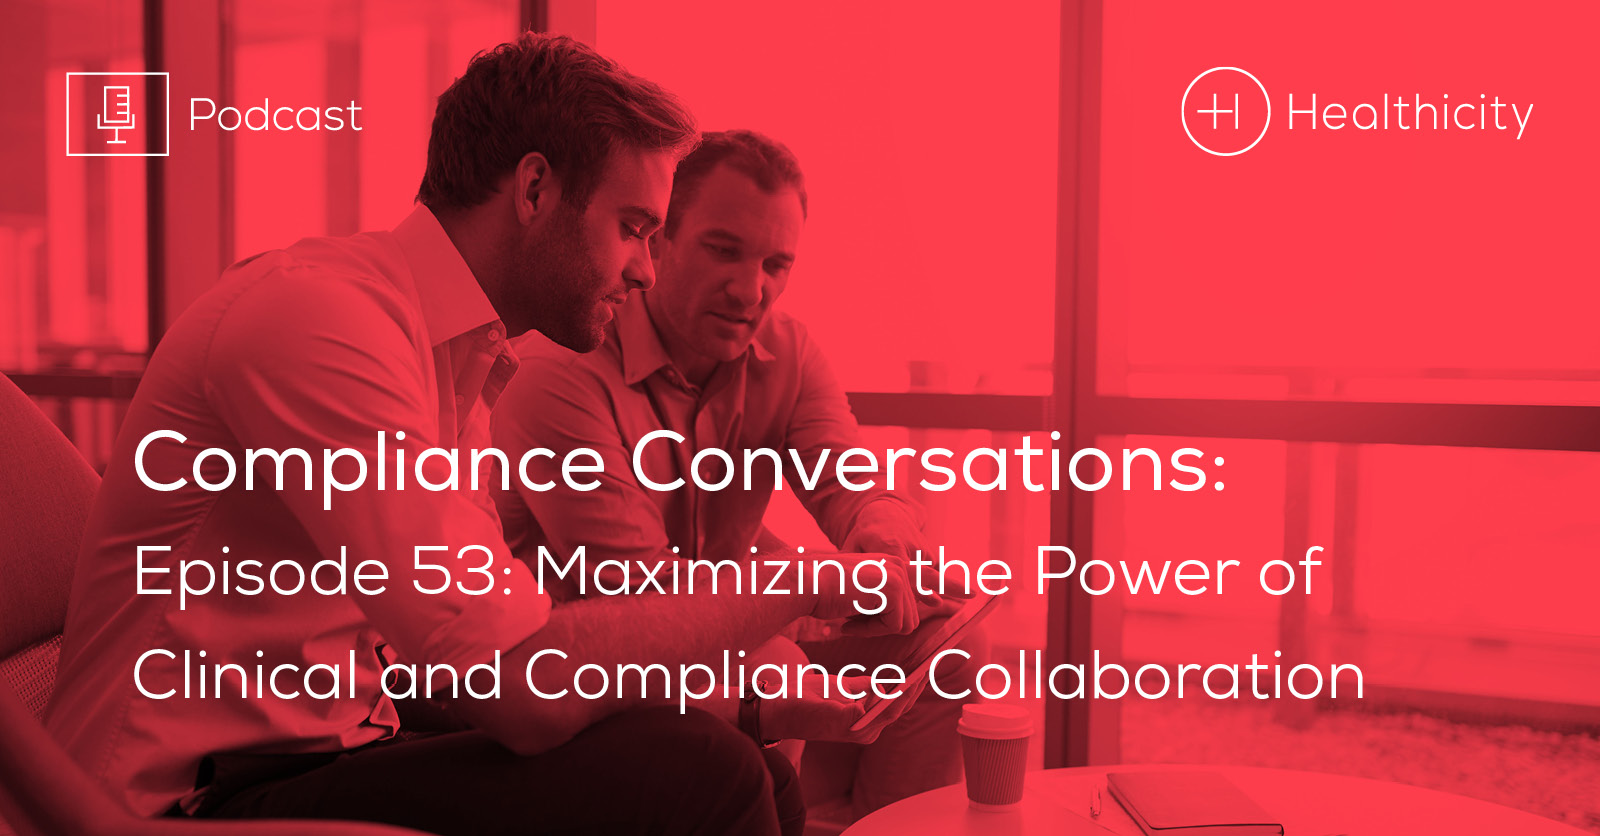 Listen to the Episode - Maximizing the Power of Clinical and Compliance Collaboration